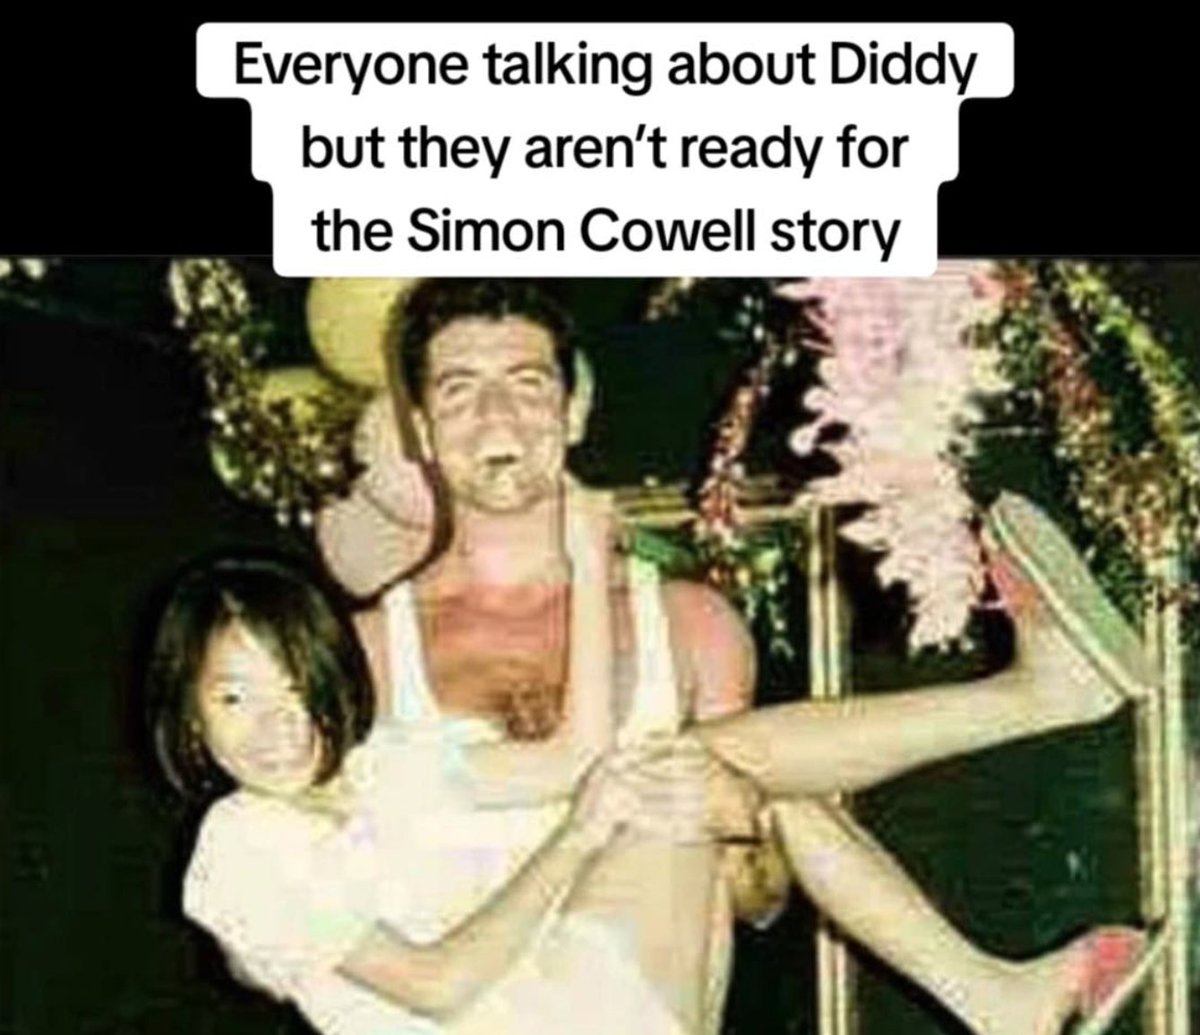 #Diddy #DiddyGate #SimonCowell